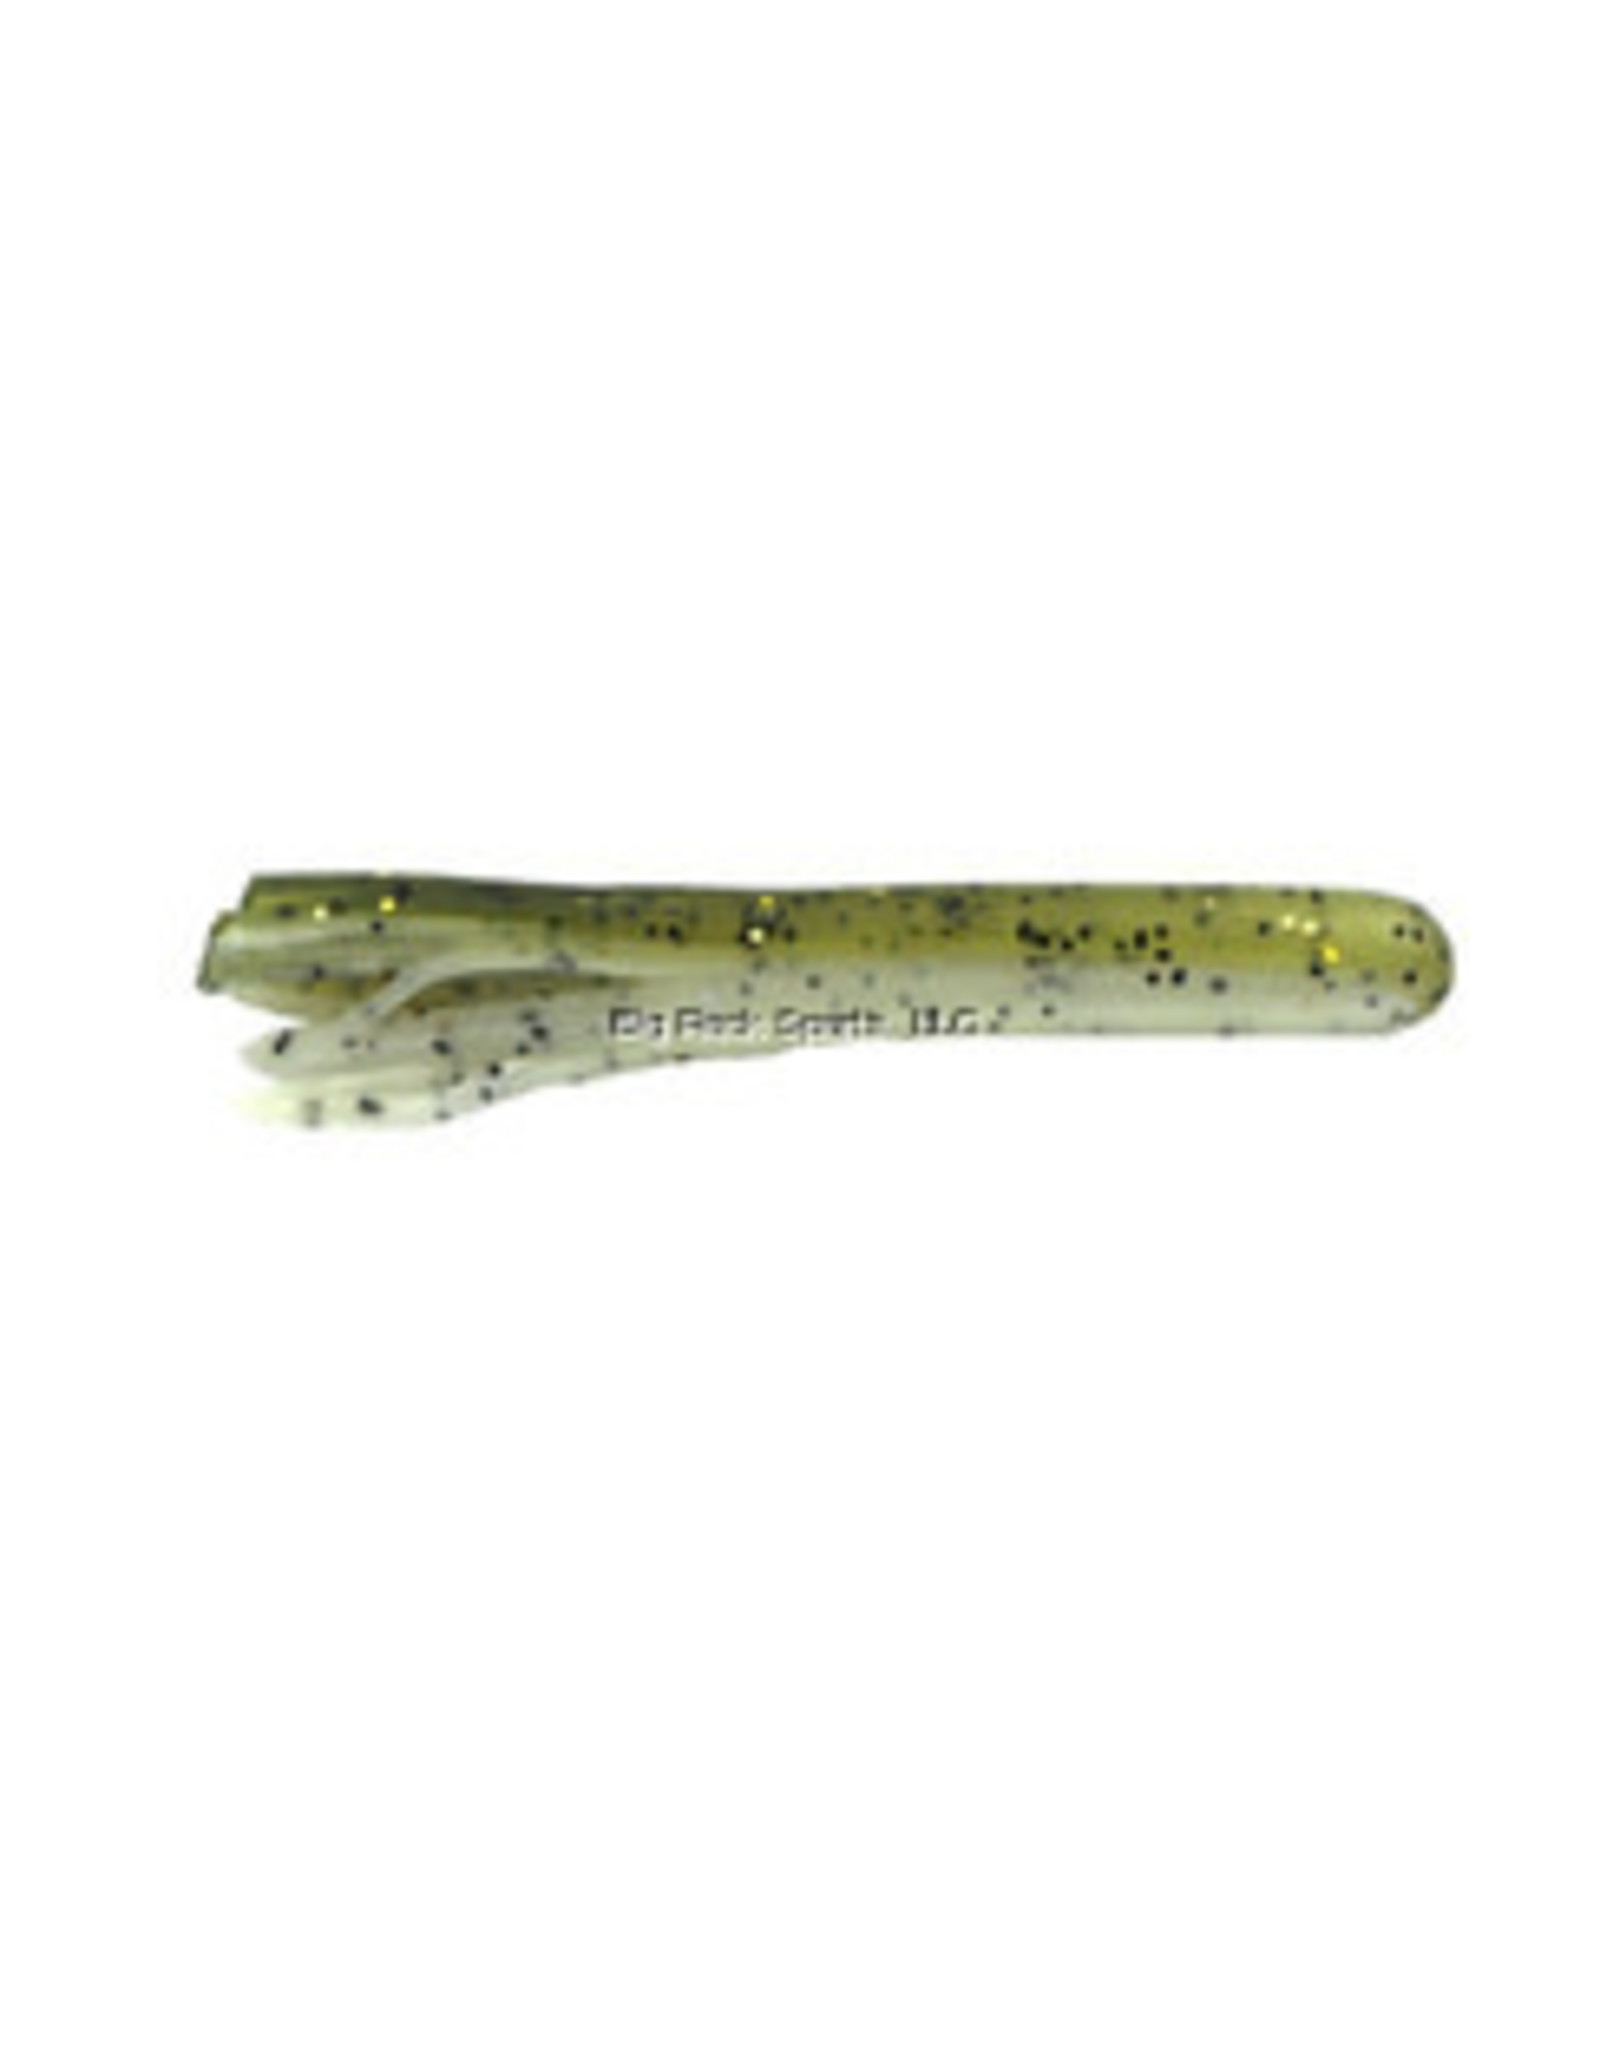 Dry Creek - Jerry's - 2" Hybrid Tube - Sexy Shad - 12 Count